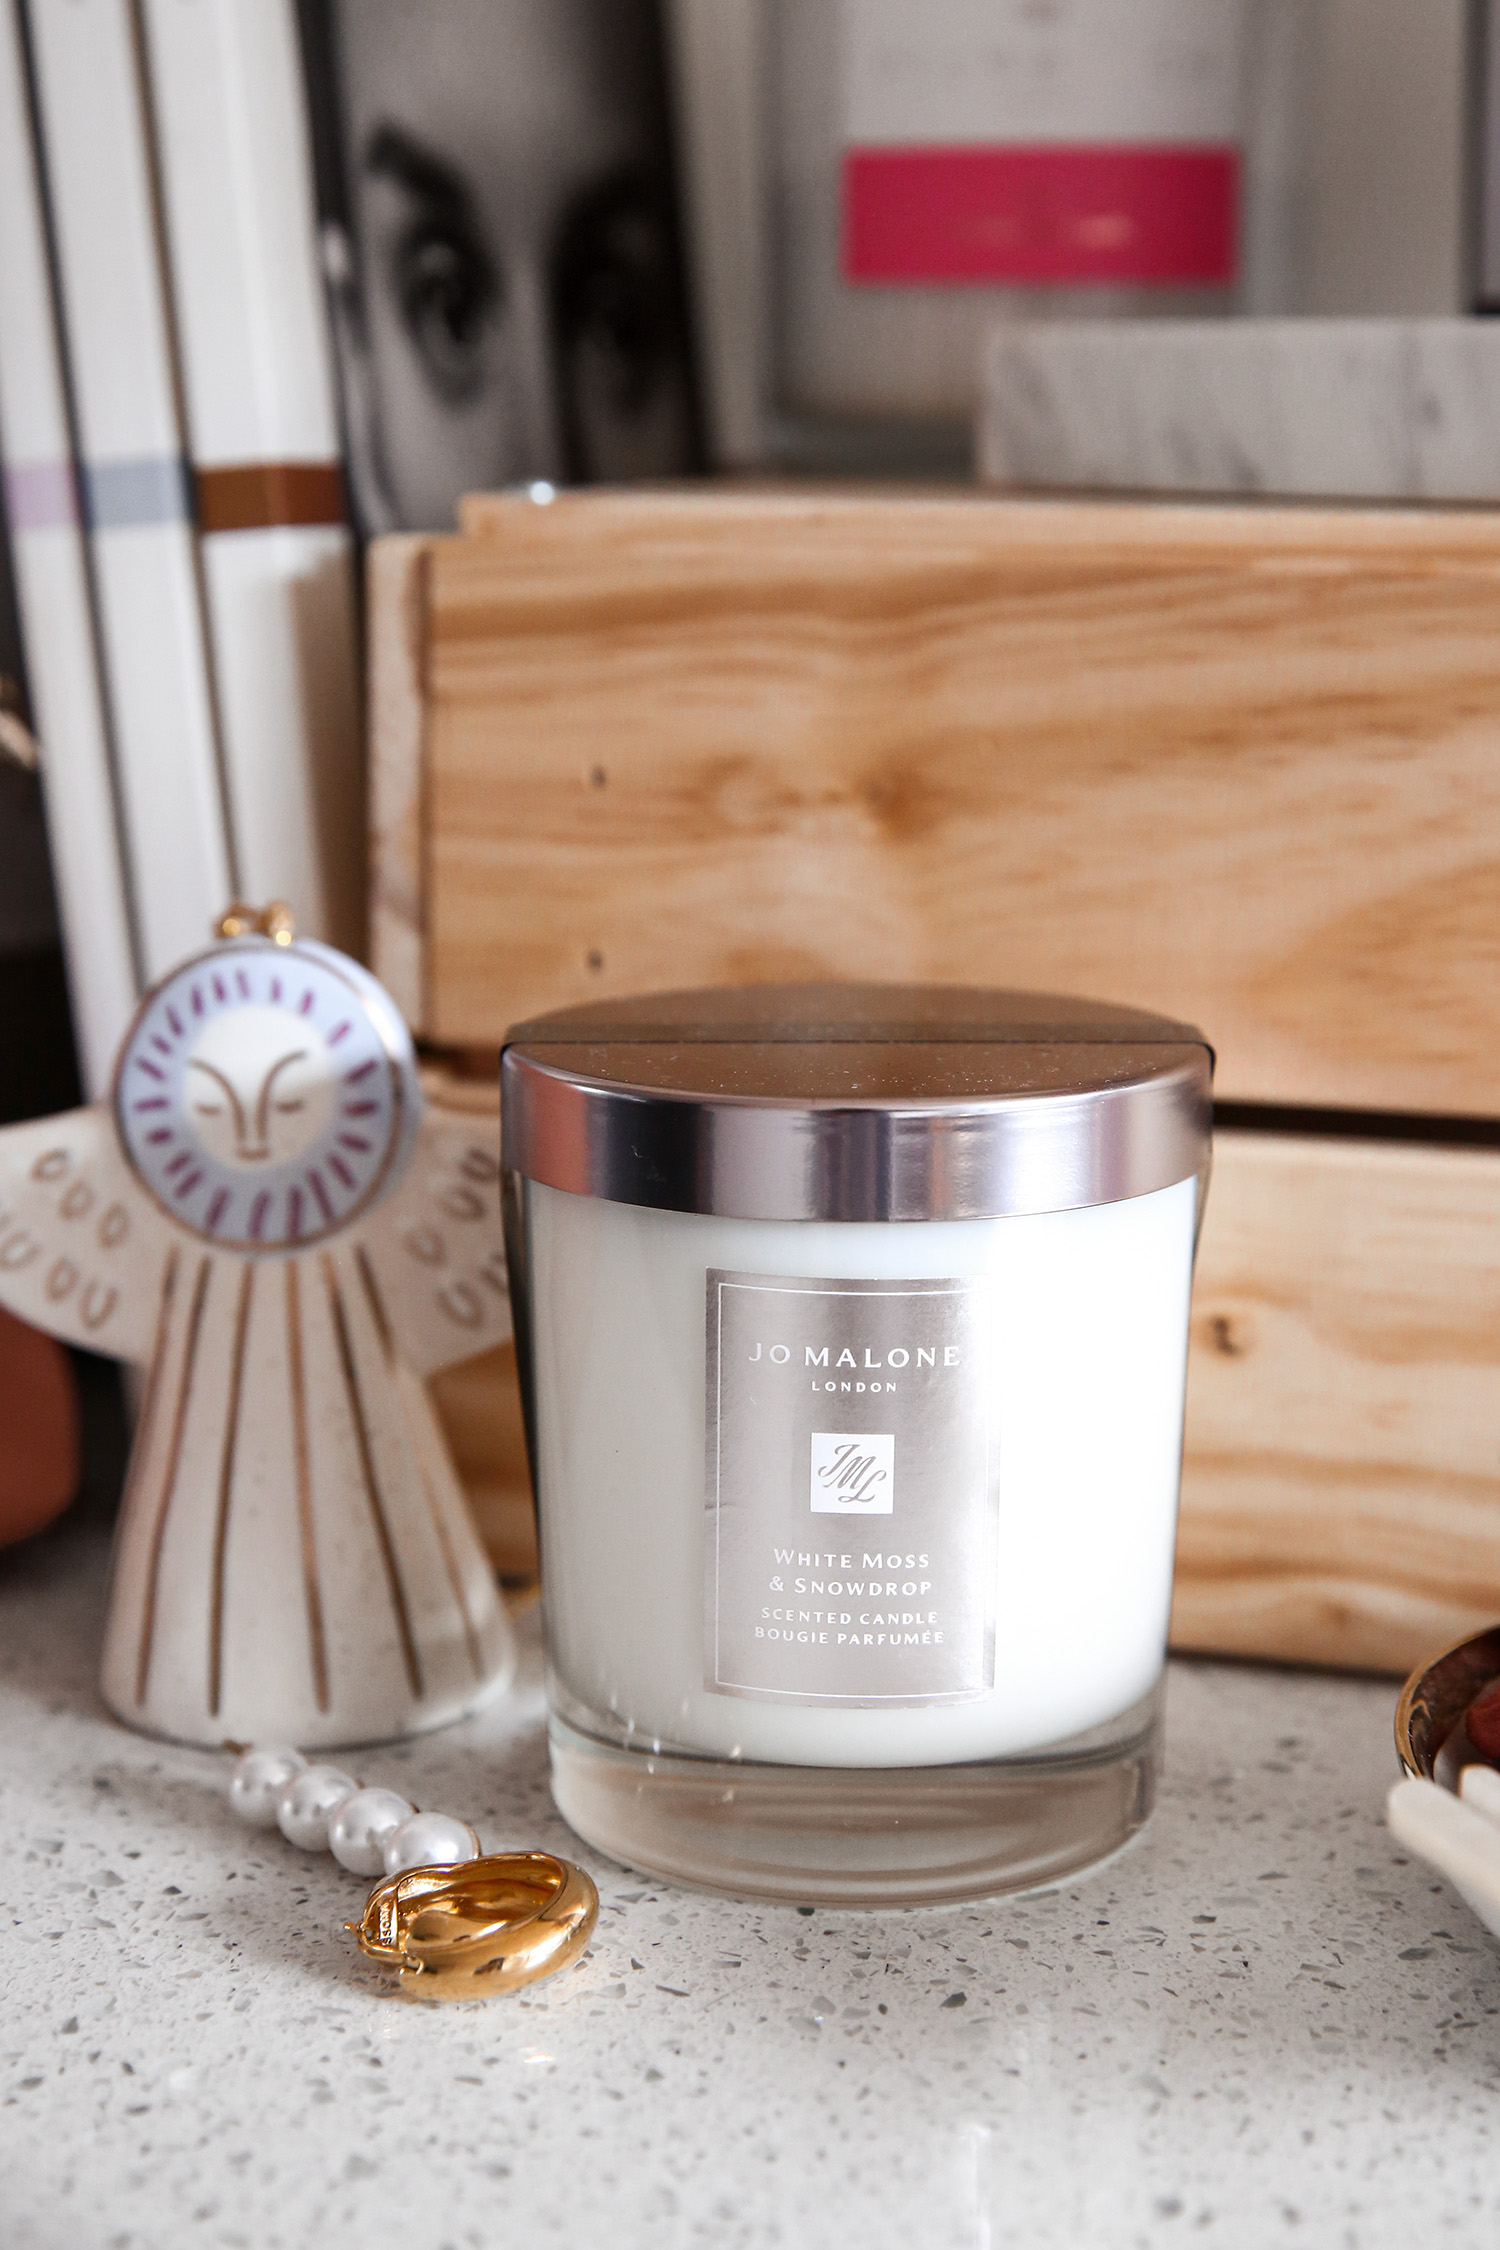 Jo Malone Holiday Collection 2021 White Moss and Snowdrop Candle Review